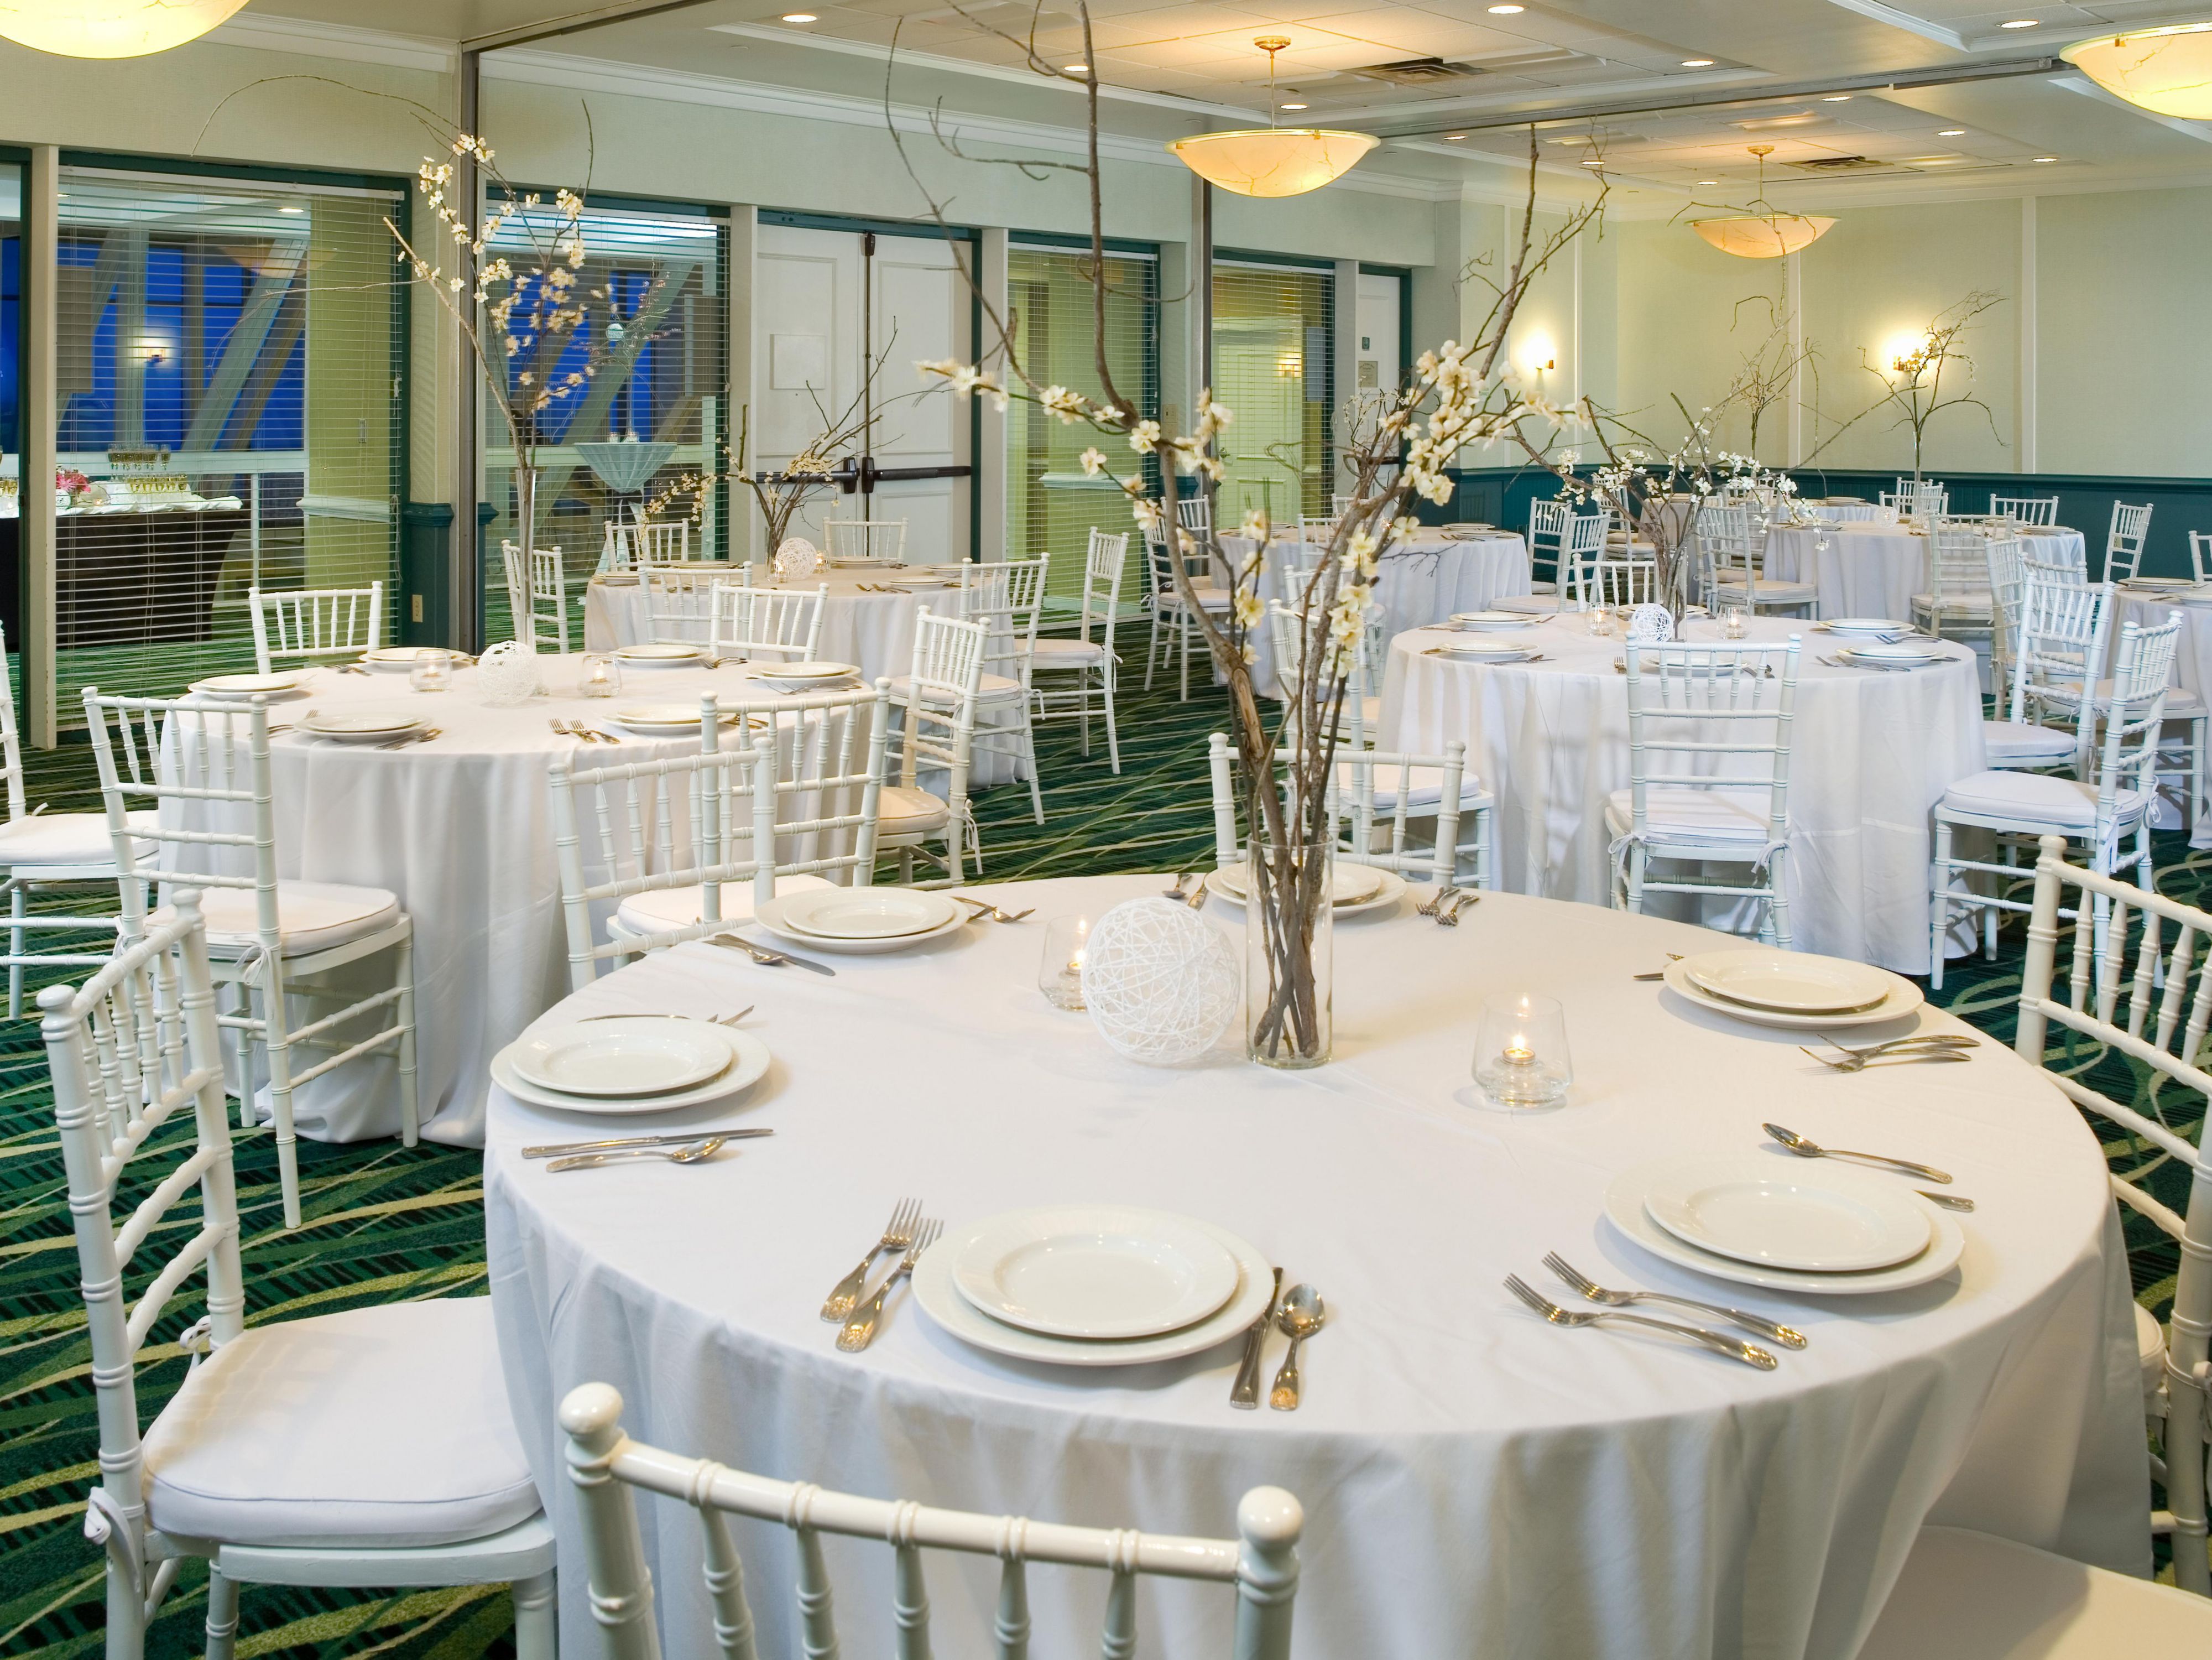 The Holiday Inn Va Beach-Oceanside (21st st) features over 1,500 square feet of meeting space for productive and memorable business meetings, banquets, wedding receptions, social events, or private parties. Wedding packages at our beachfront hotel can be customized for up to 100 people to make your dreams come true. Begin your ever-after with us!